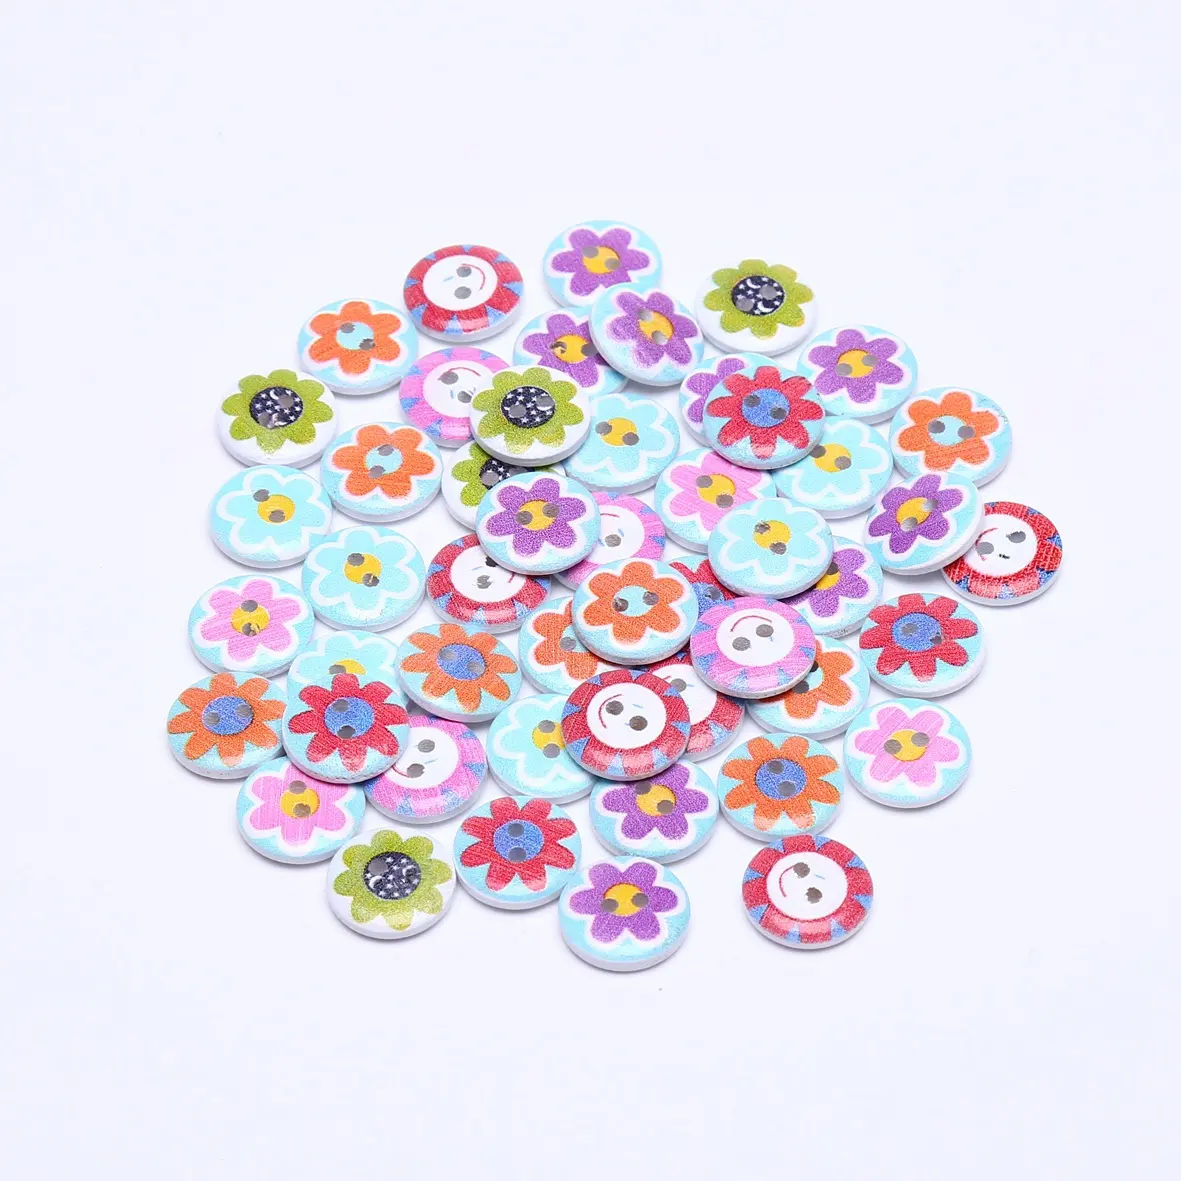 100pcs/bag Wood Buttons 15mm Sunflowers Painted Sewing Round Button For Scrapbooking Embellishments